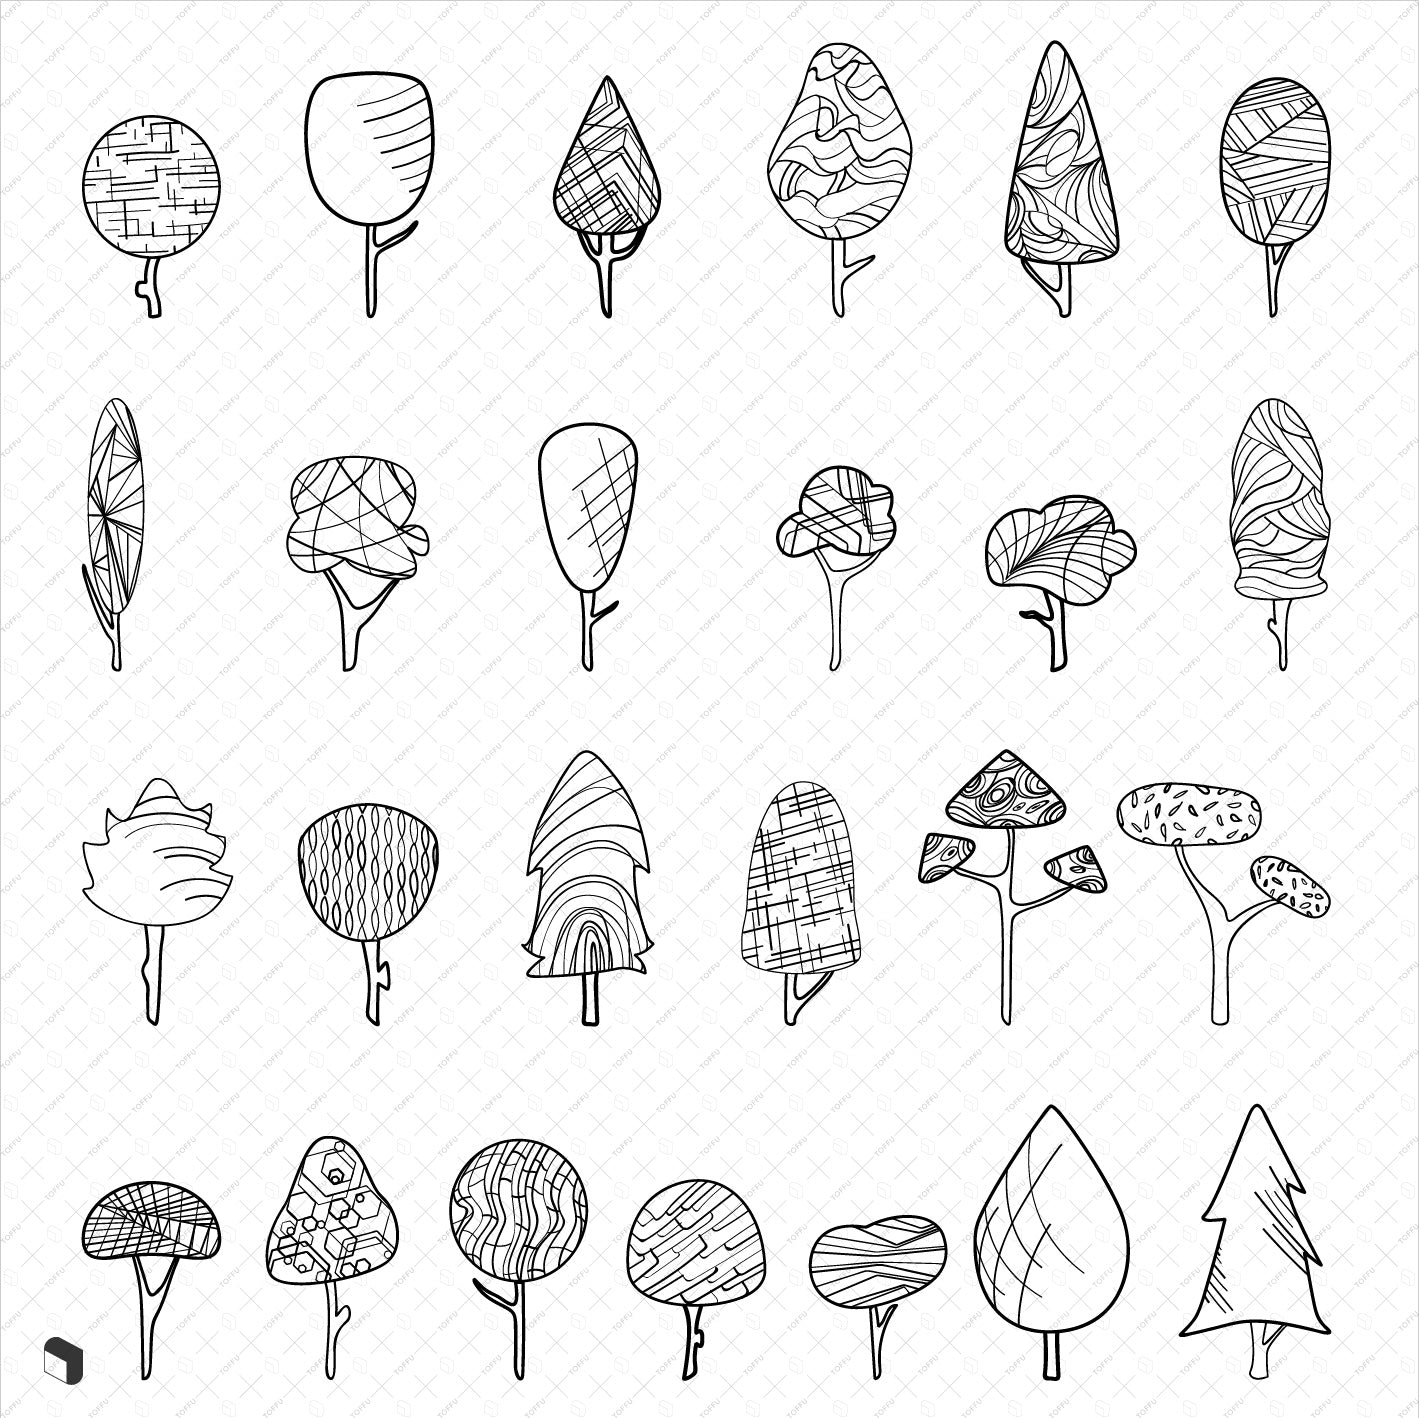 Flat Vector Freehand Trees 3 - Toffu Co